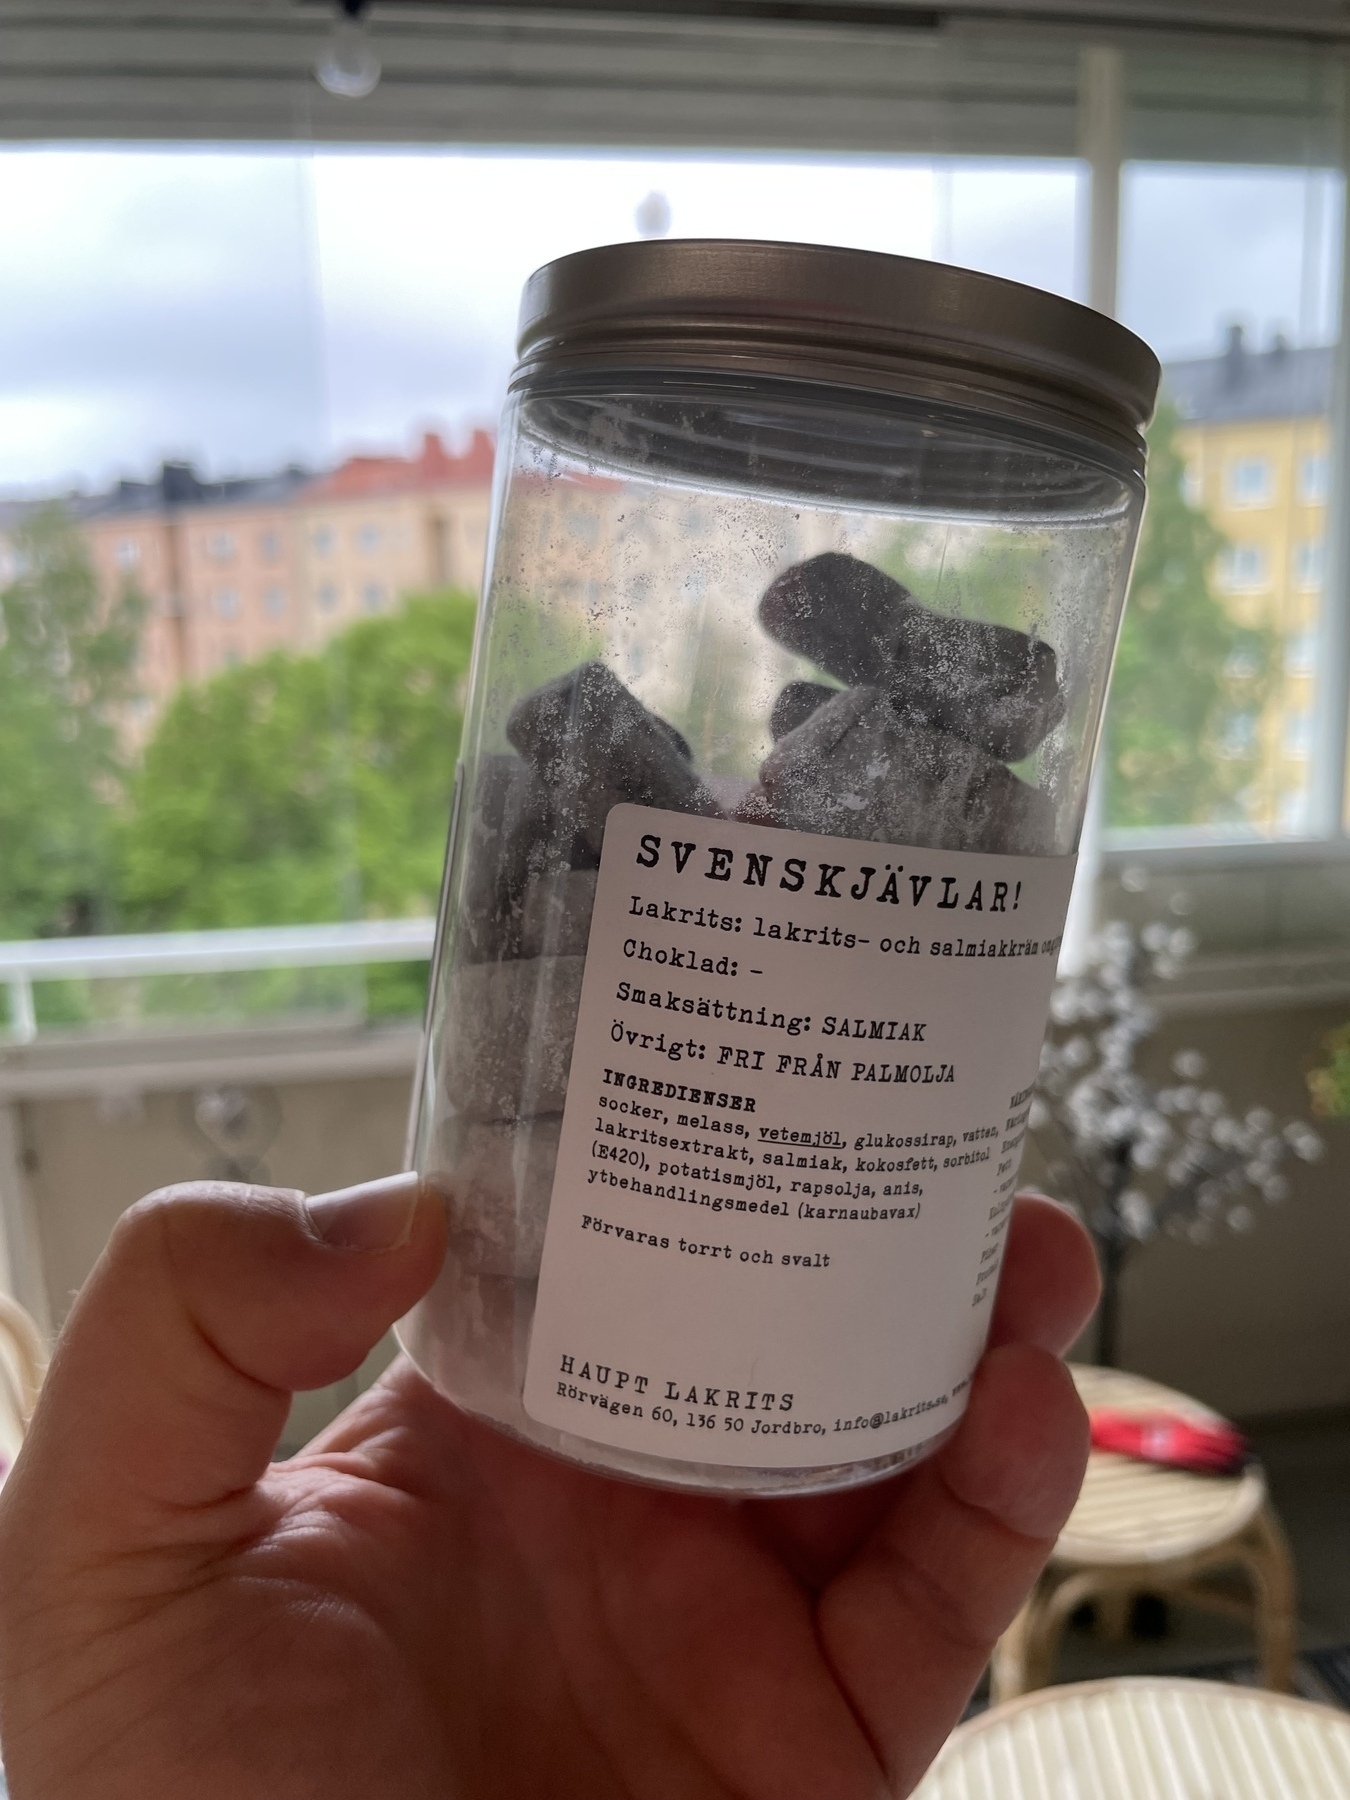 A hand holding a jar of black, powder-coated candies with a white label featuring the large text "SVENSKJÄVLAR!" in Swedish. The background shows an outdoor scene with green trees and several buildings, indicating the jar is being held near a window.